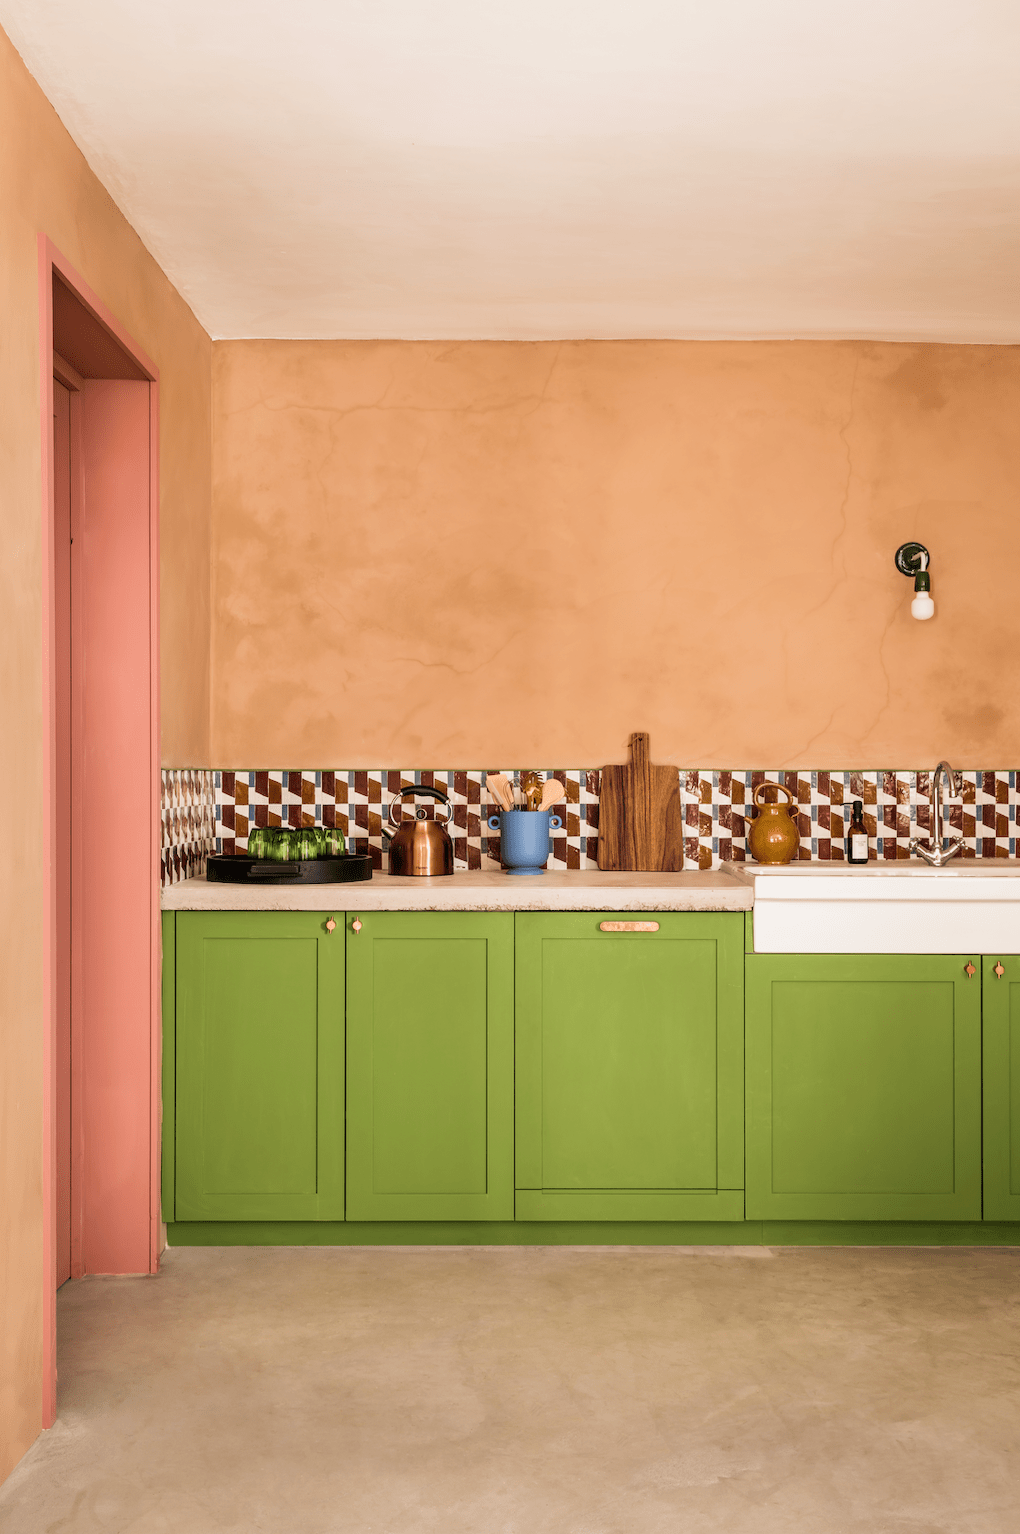 The kitchen where you could easily imagine Wes Anderson shooting his next film. © Romain Ricard